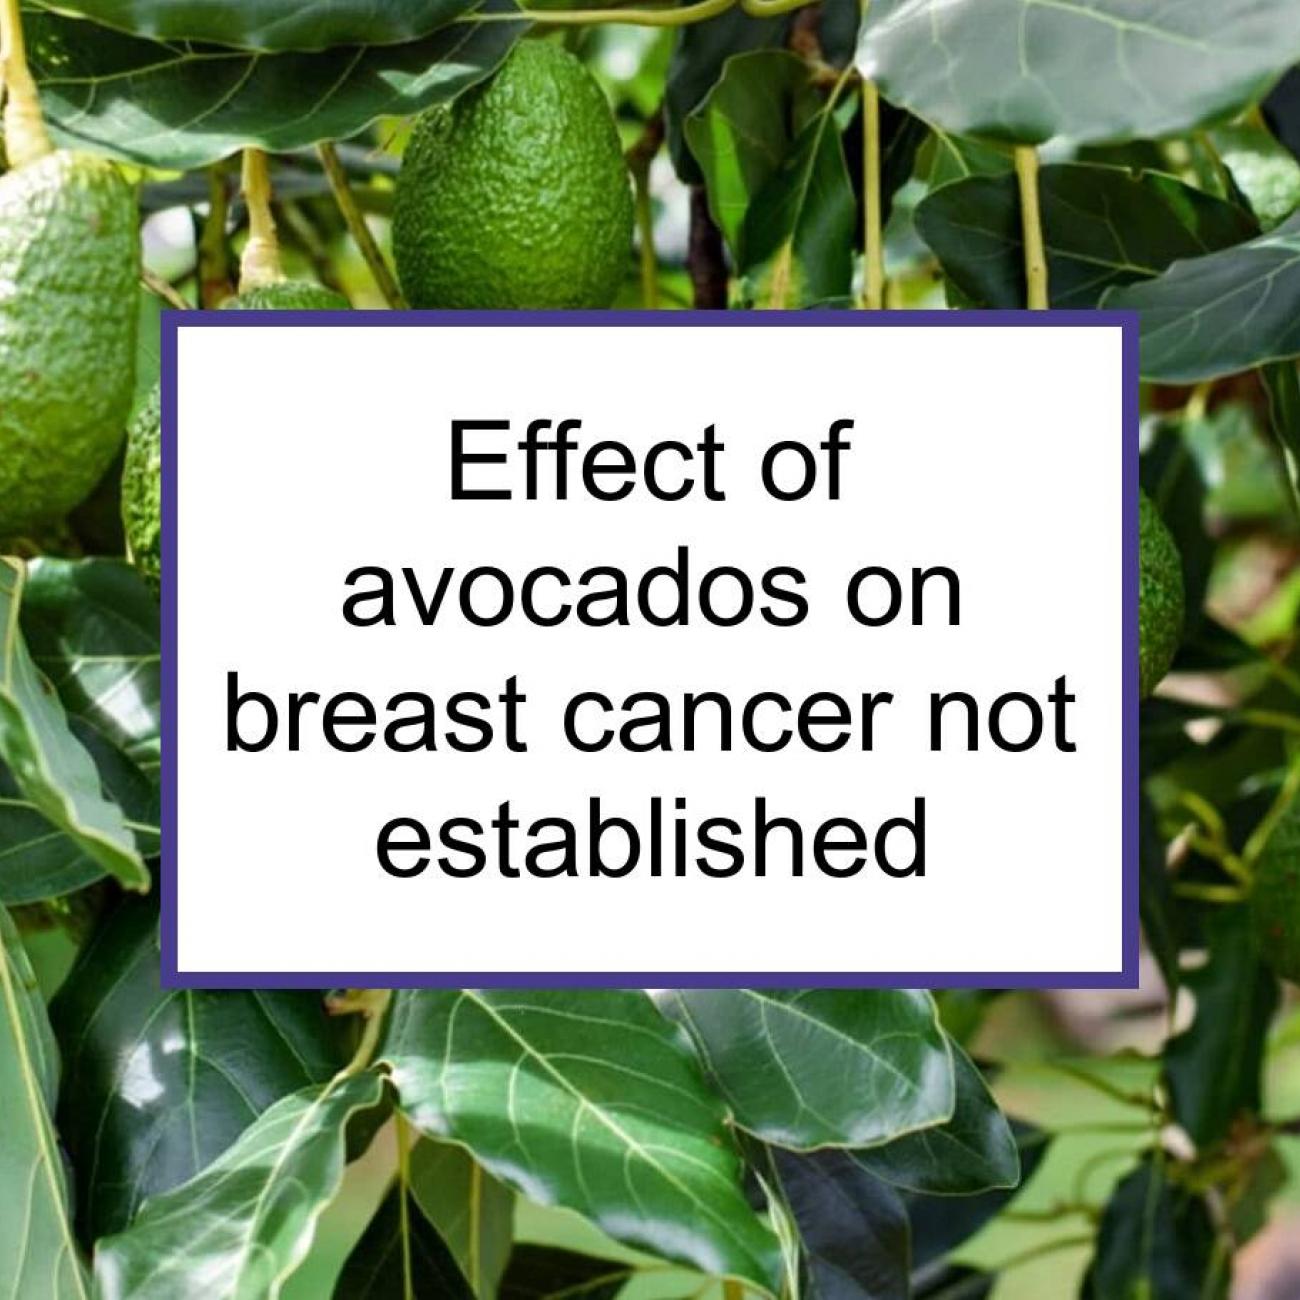 Are avocado leaves poisonous to livestock such as goats or cows